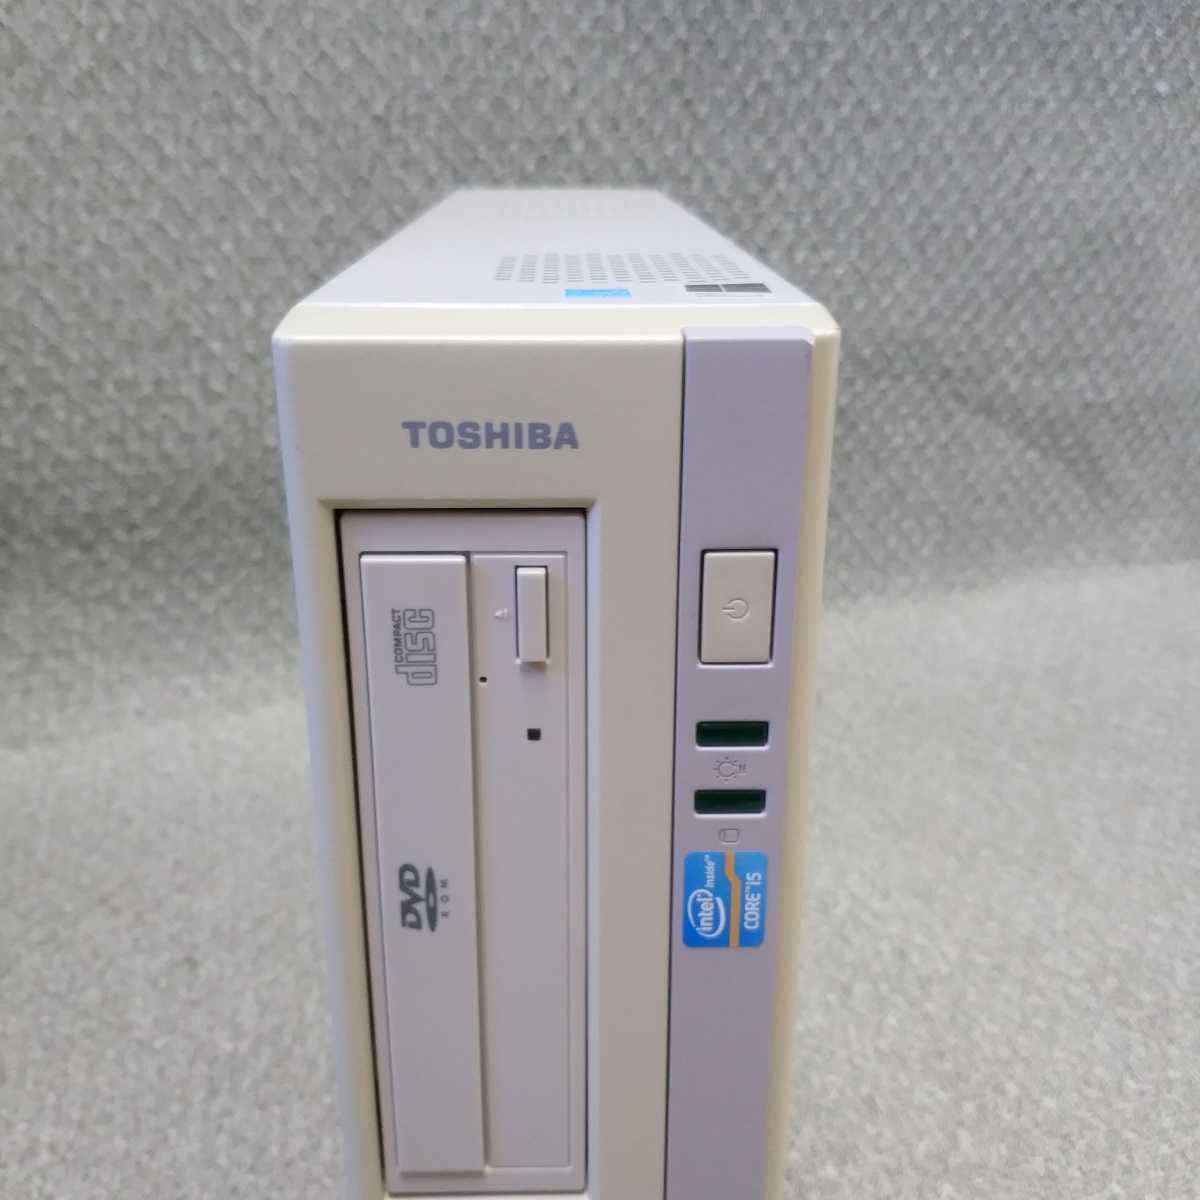 Windows XP*10*7 OS selection possible *TOSHIBA EQUIUM 4020 * Core i5-3470/HDD1TB/4GB/ parallel / digital RGB/ convenient soft / recovery - making /T053Z